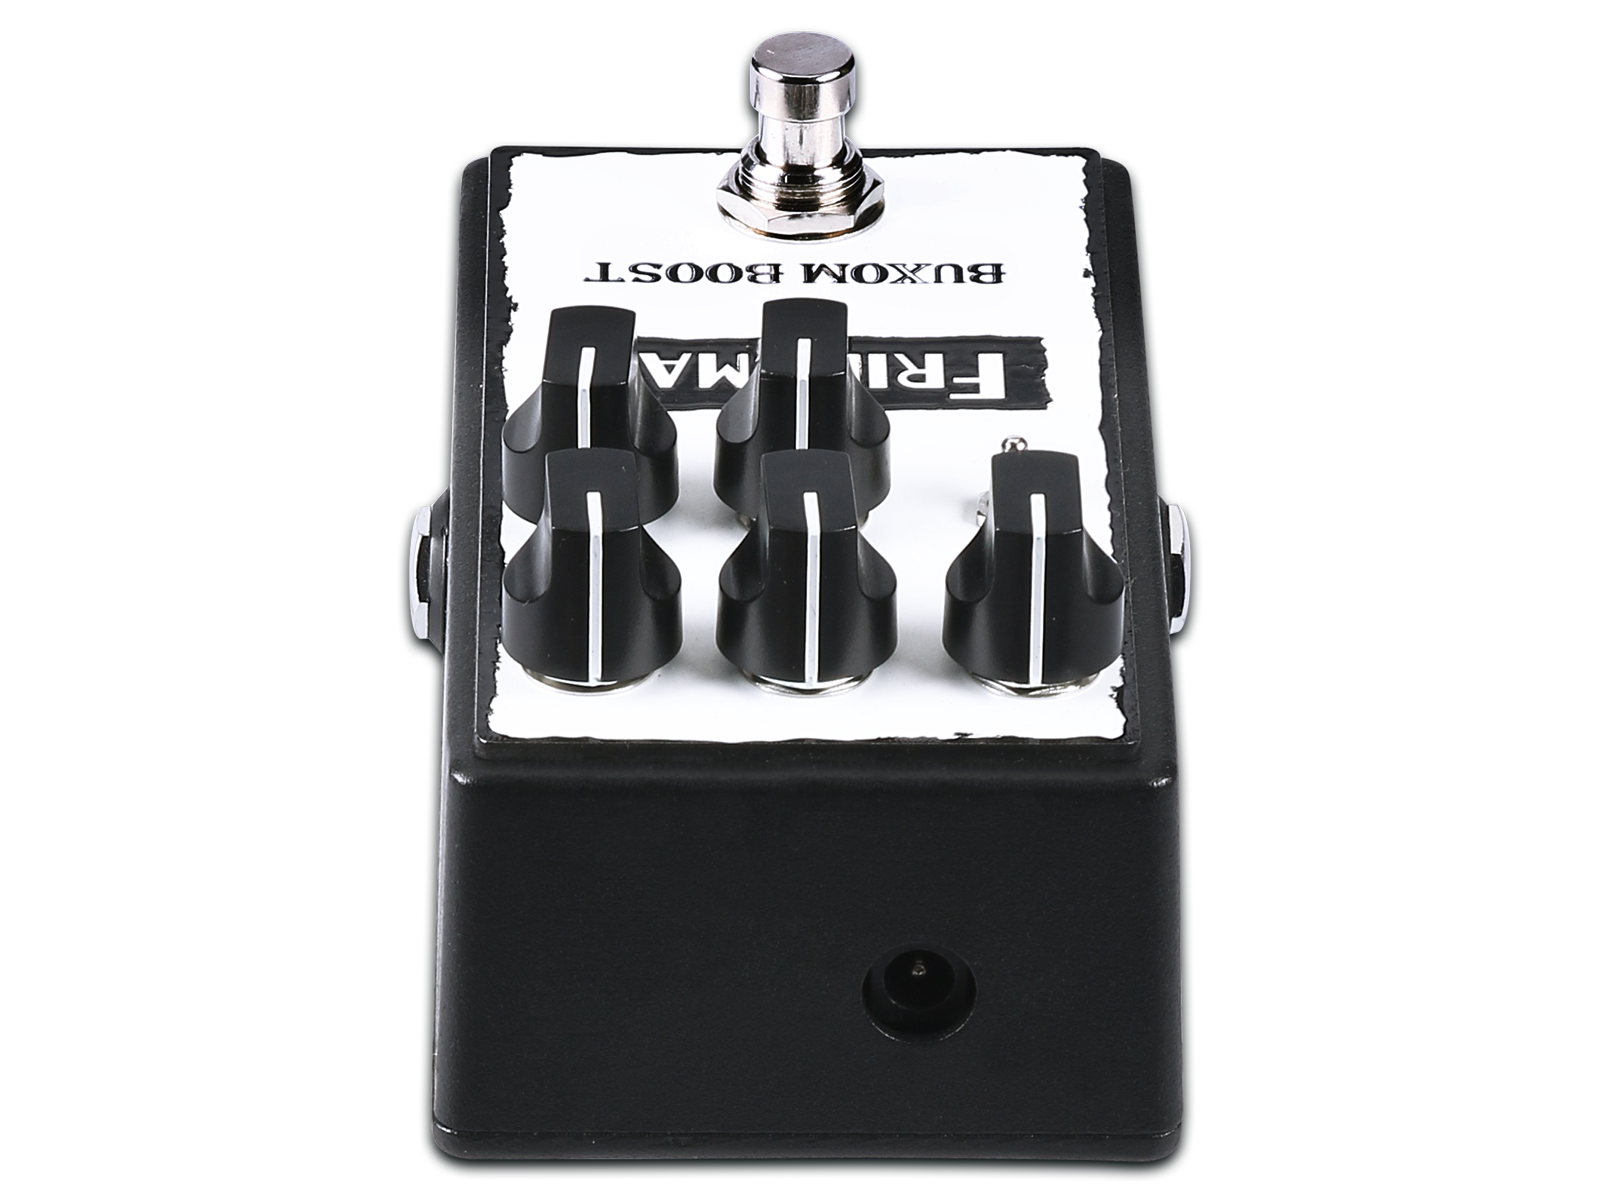 Friedman Amplification Buxom Boost - Volume, boost & expression effect pedal - Variation 2